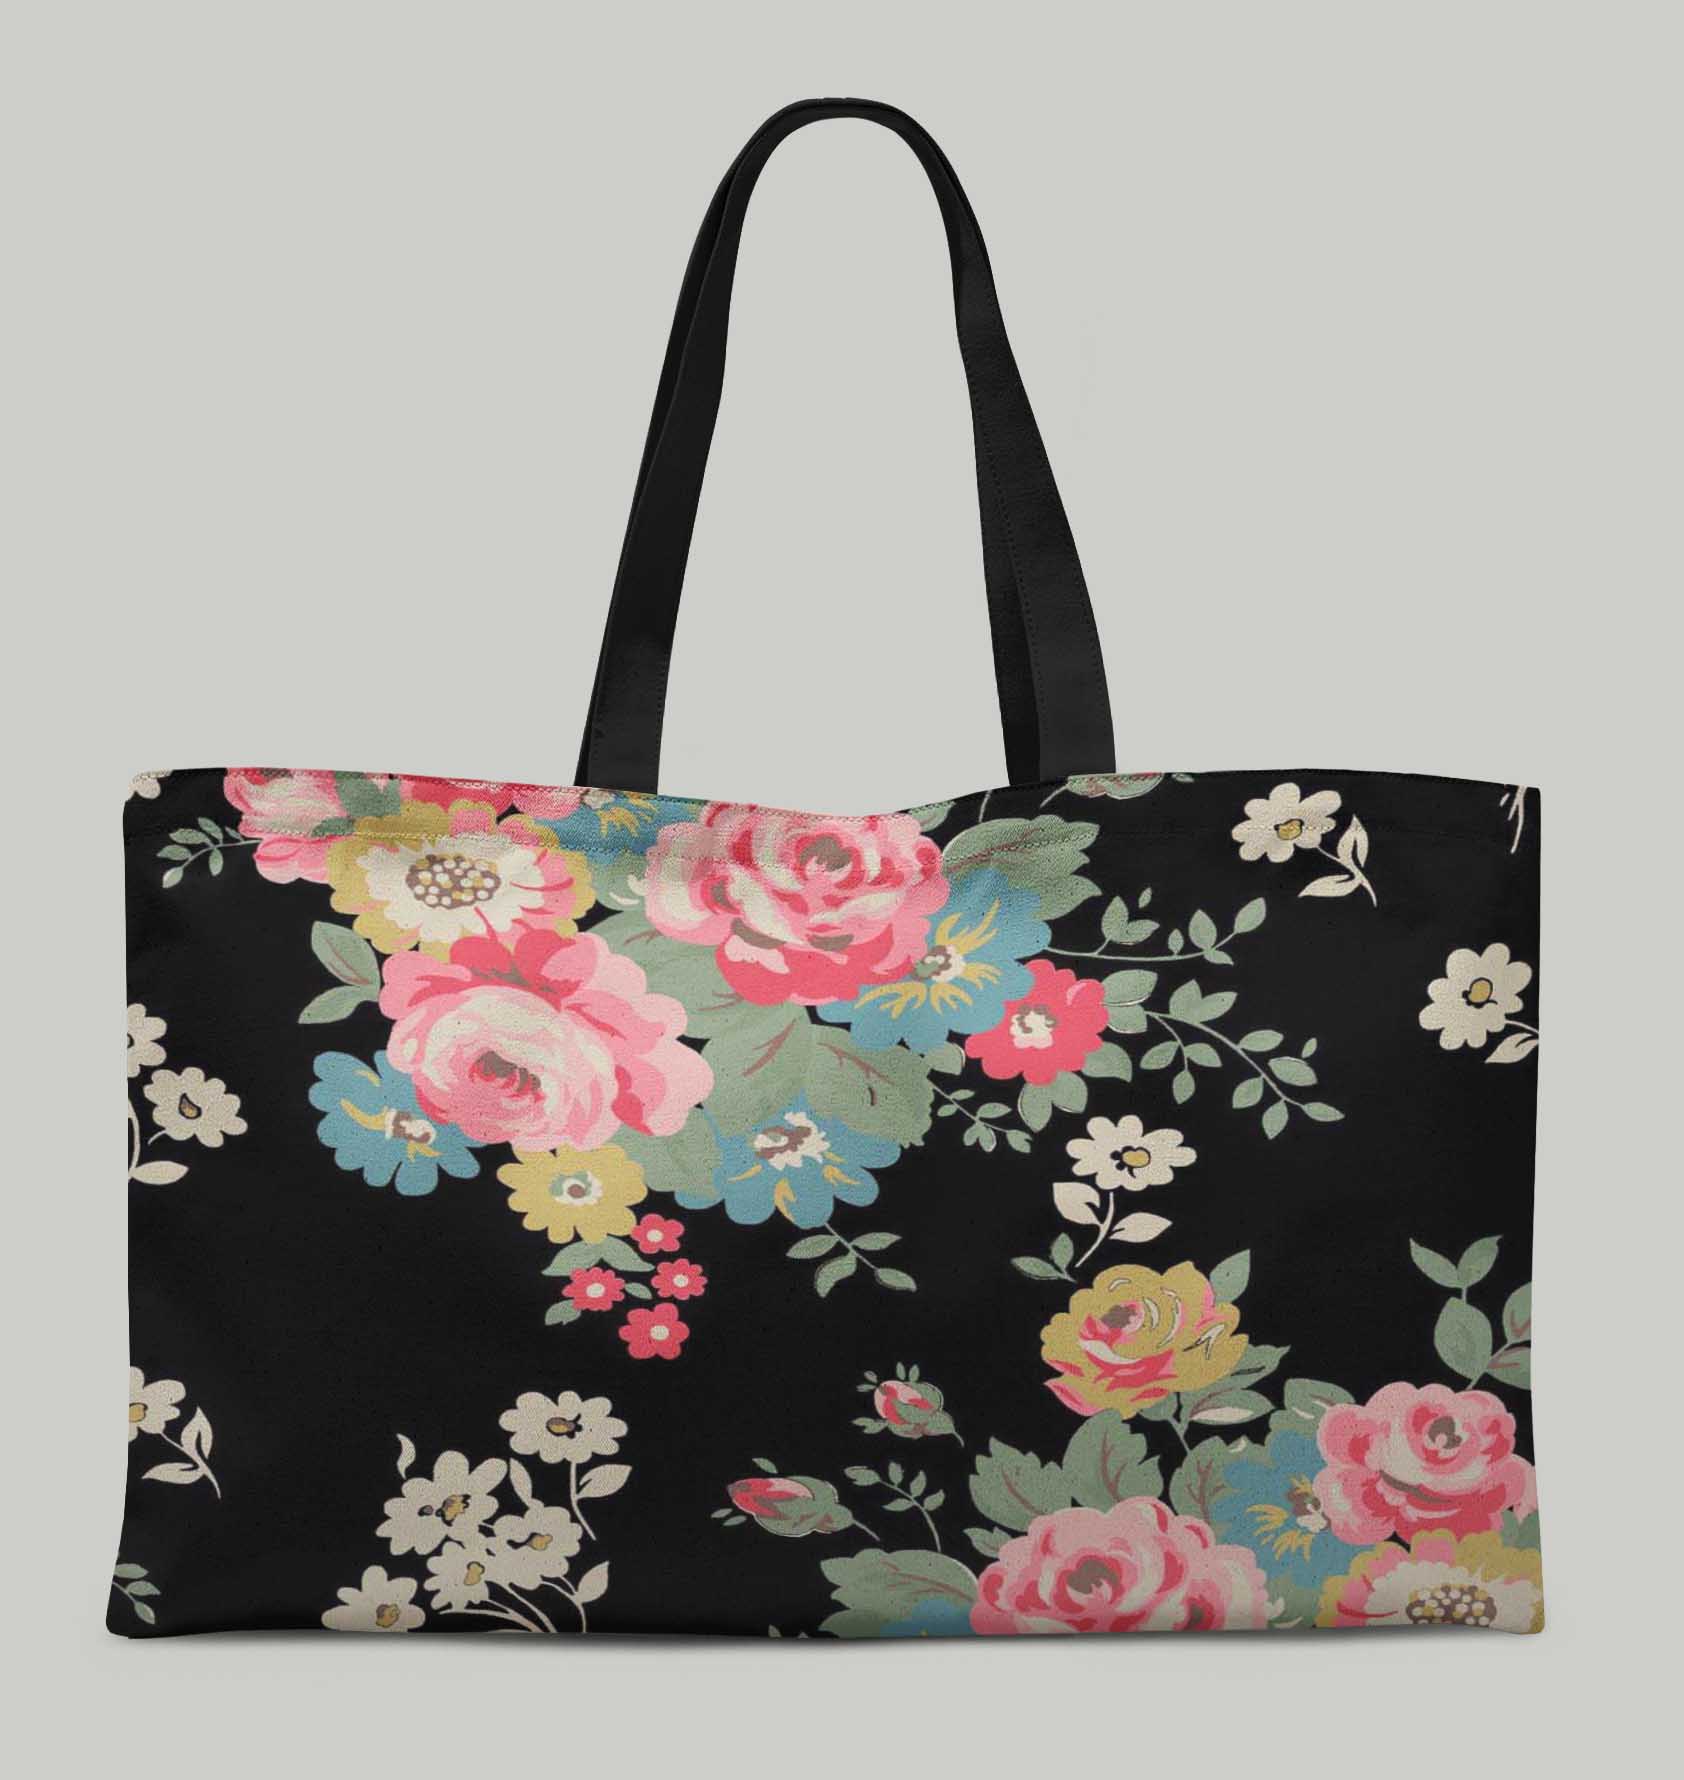 FL-838C Details about   S4Sassy Floral  Canvas Shopping Tote Bag Carrying Handbag Casual Bag